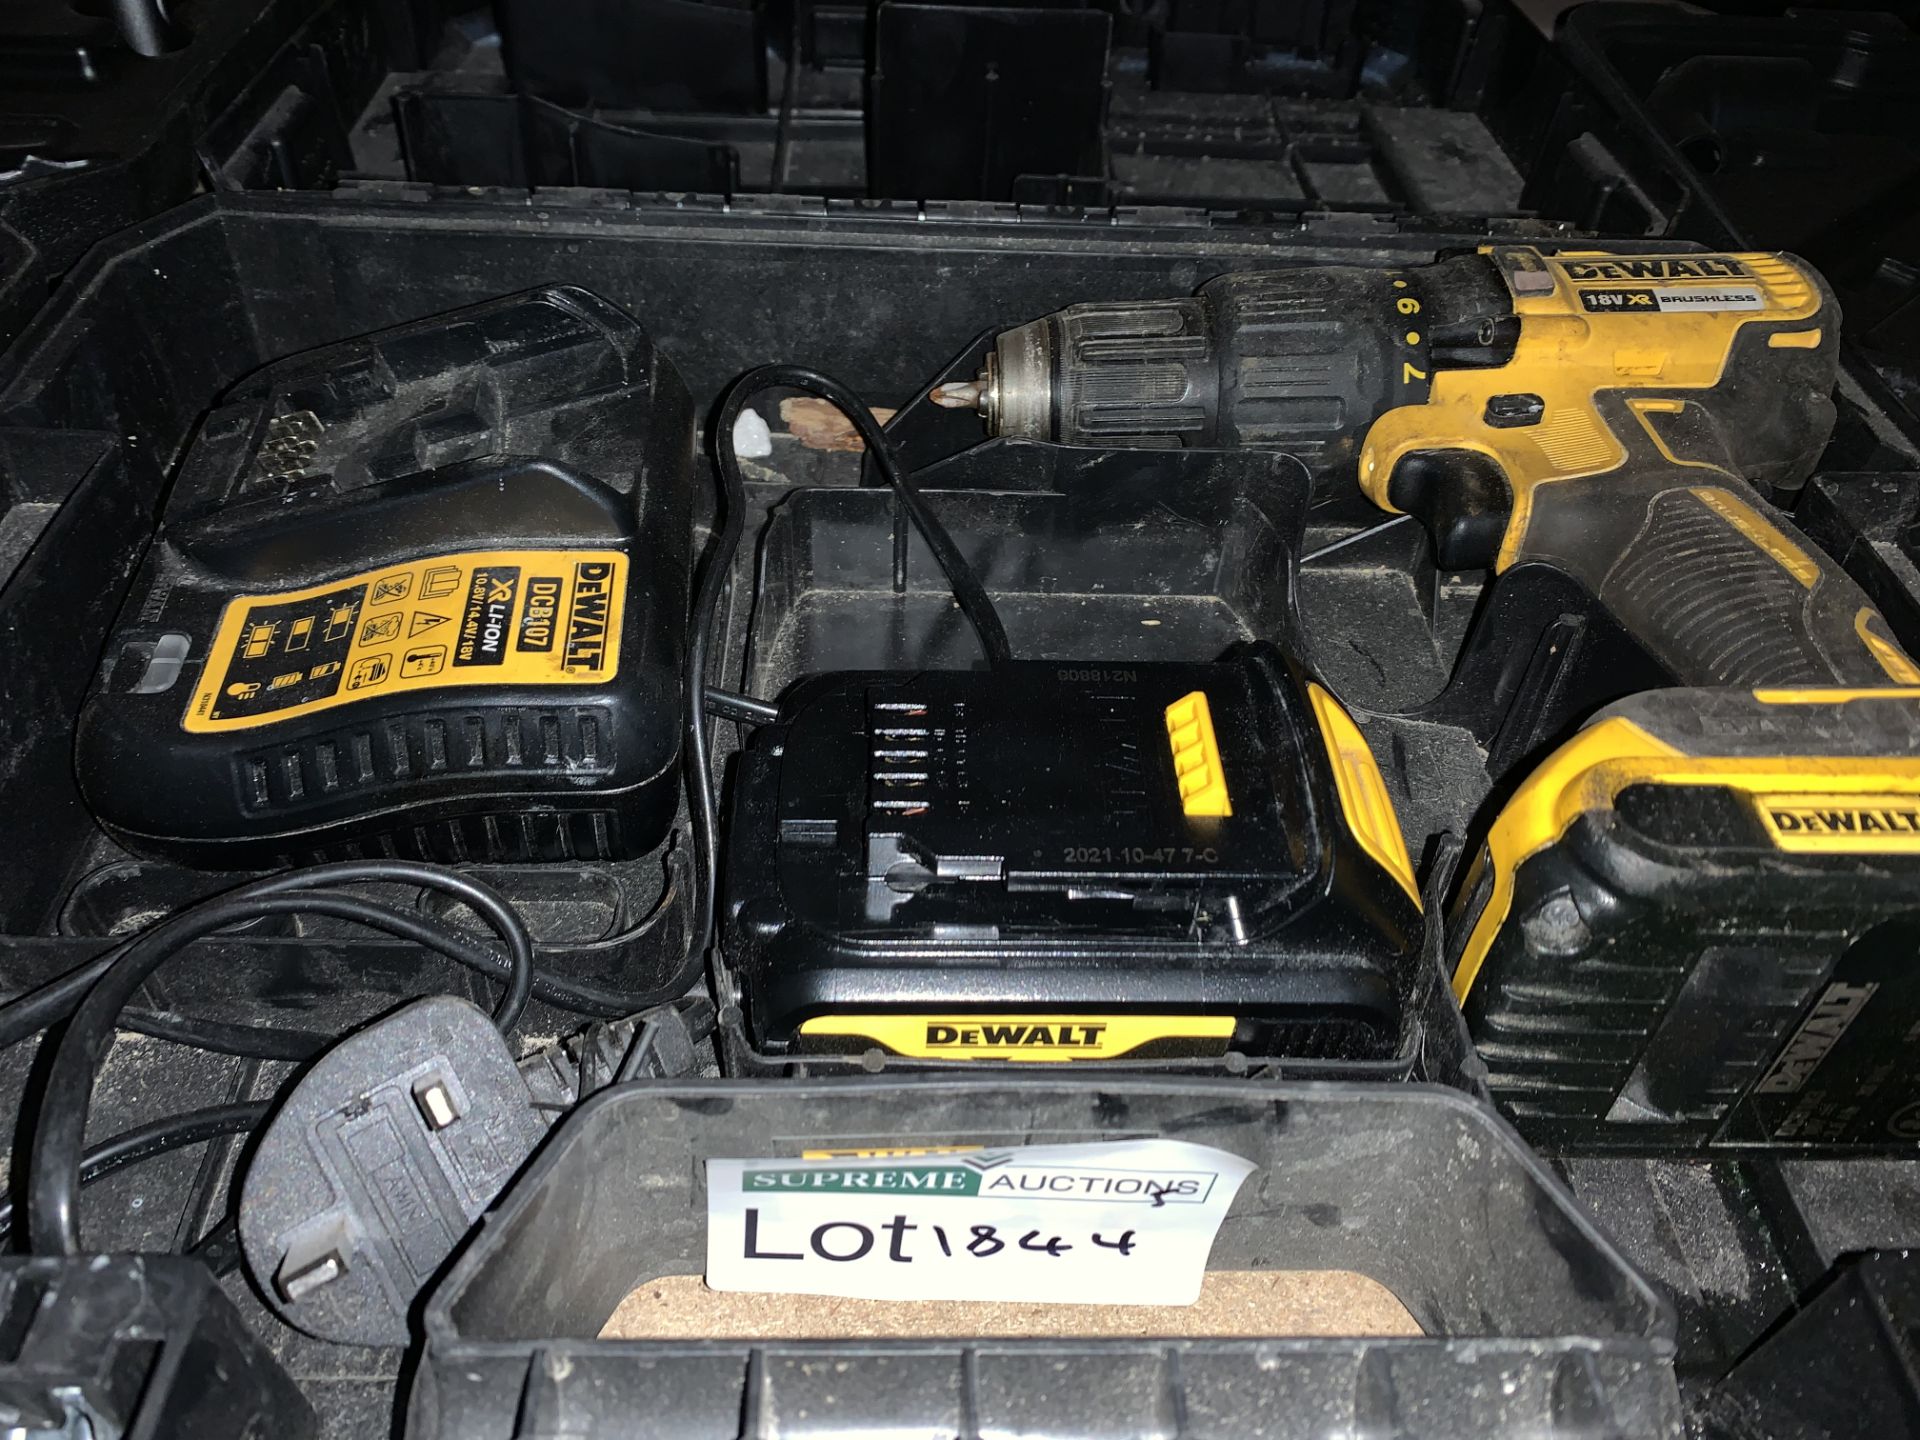 DEWALT CORDLESS BRUSHLESS COMBI DRILL COMES WITH 2 BATTERIES, CHARGER AND CARRY CASE (UNCHECKED,